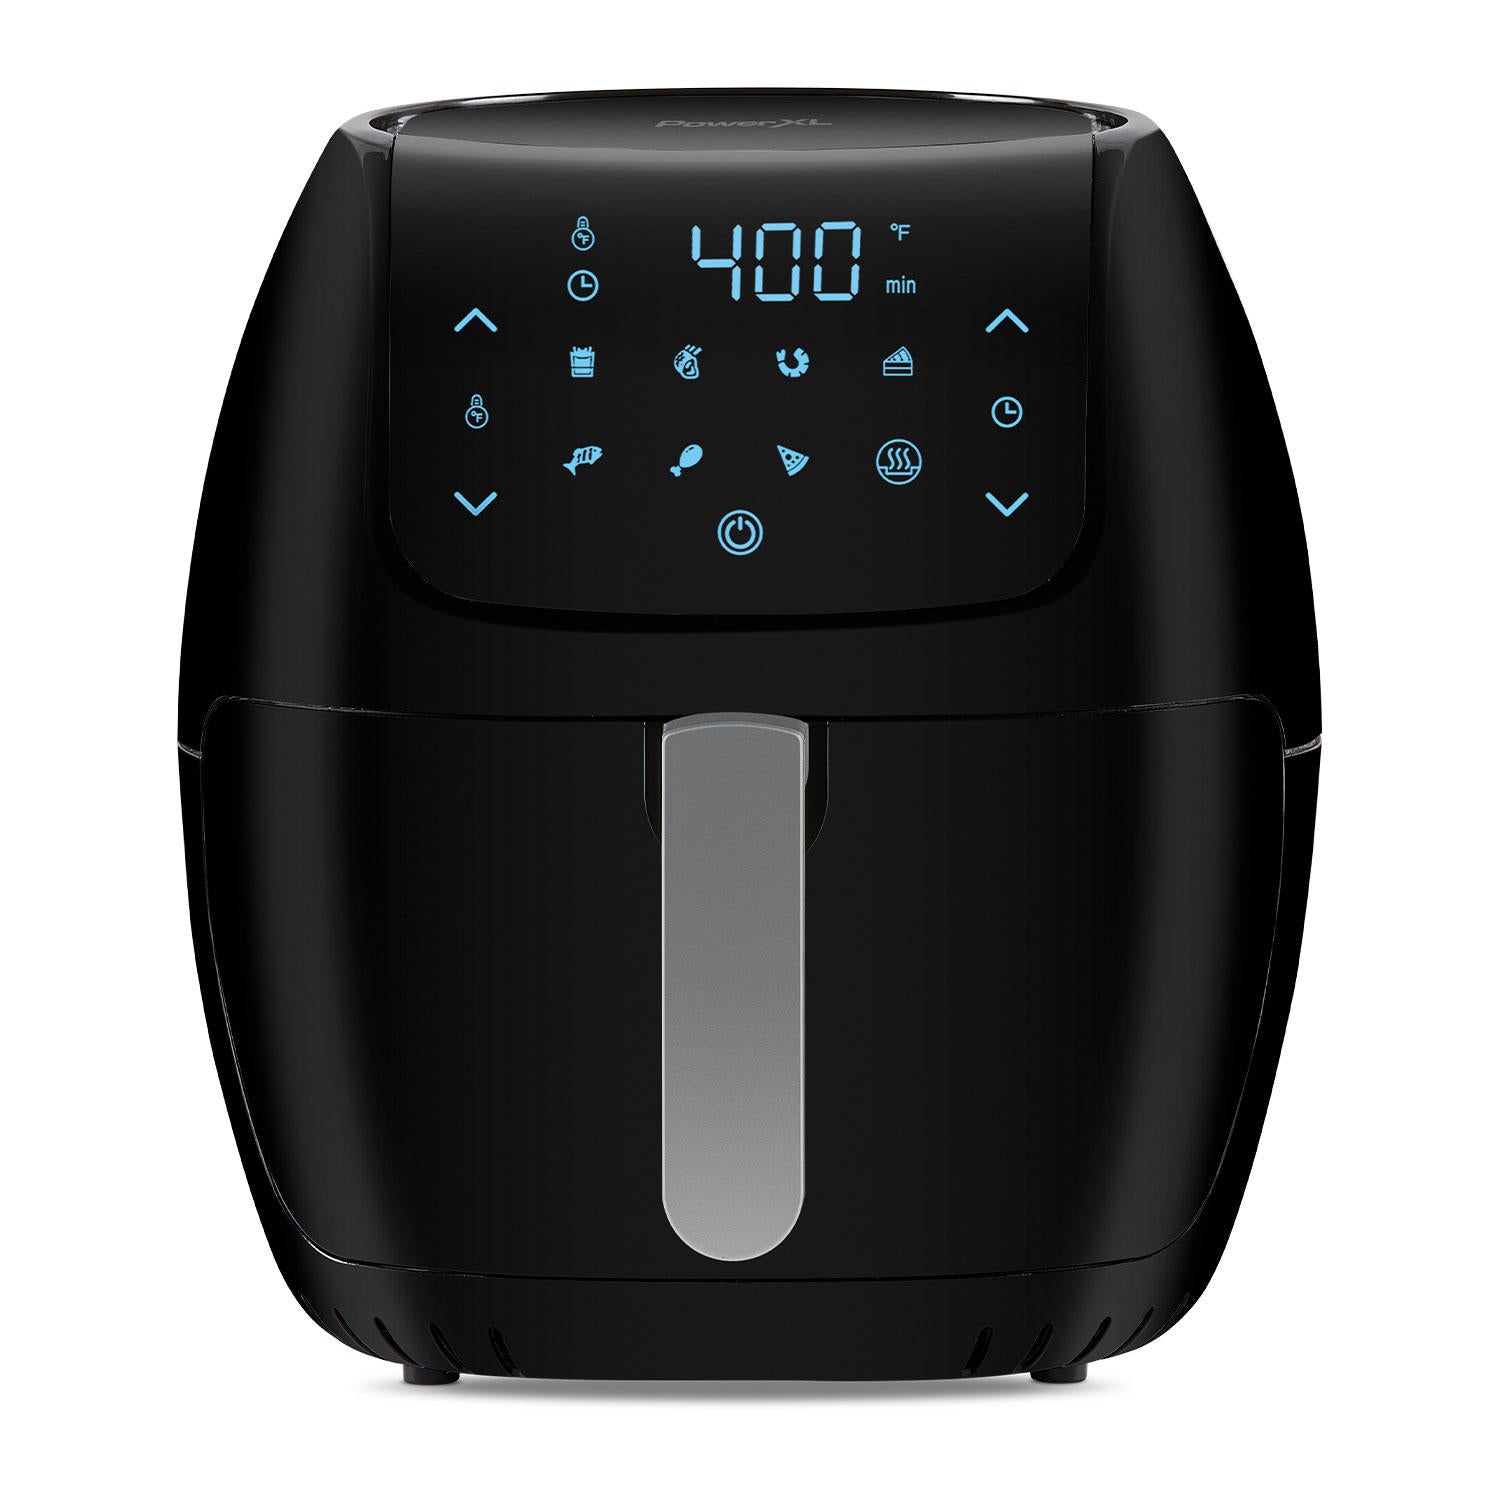 Best deal Power XL 8 QT Air Fryer Unboxing November2020 and Air fried Baby  Potatoes